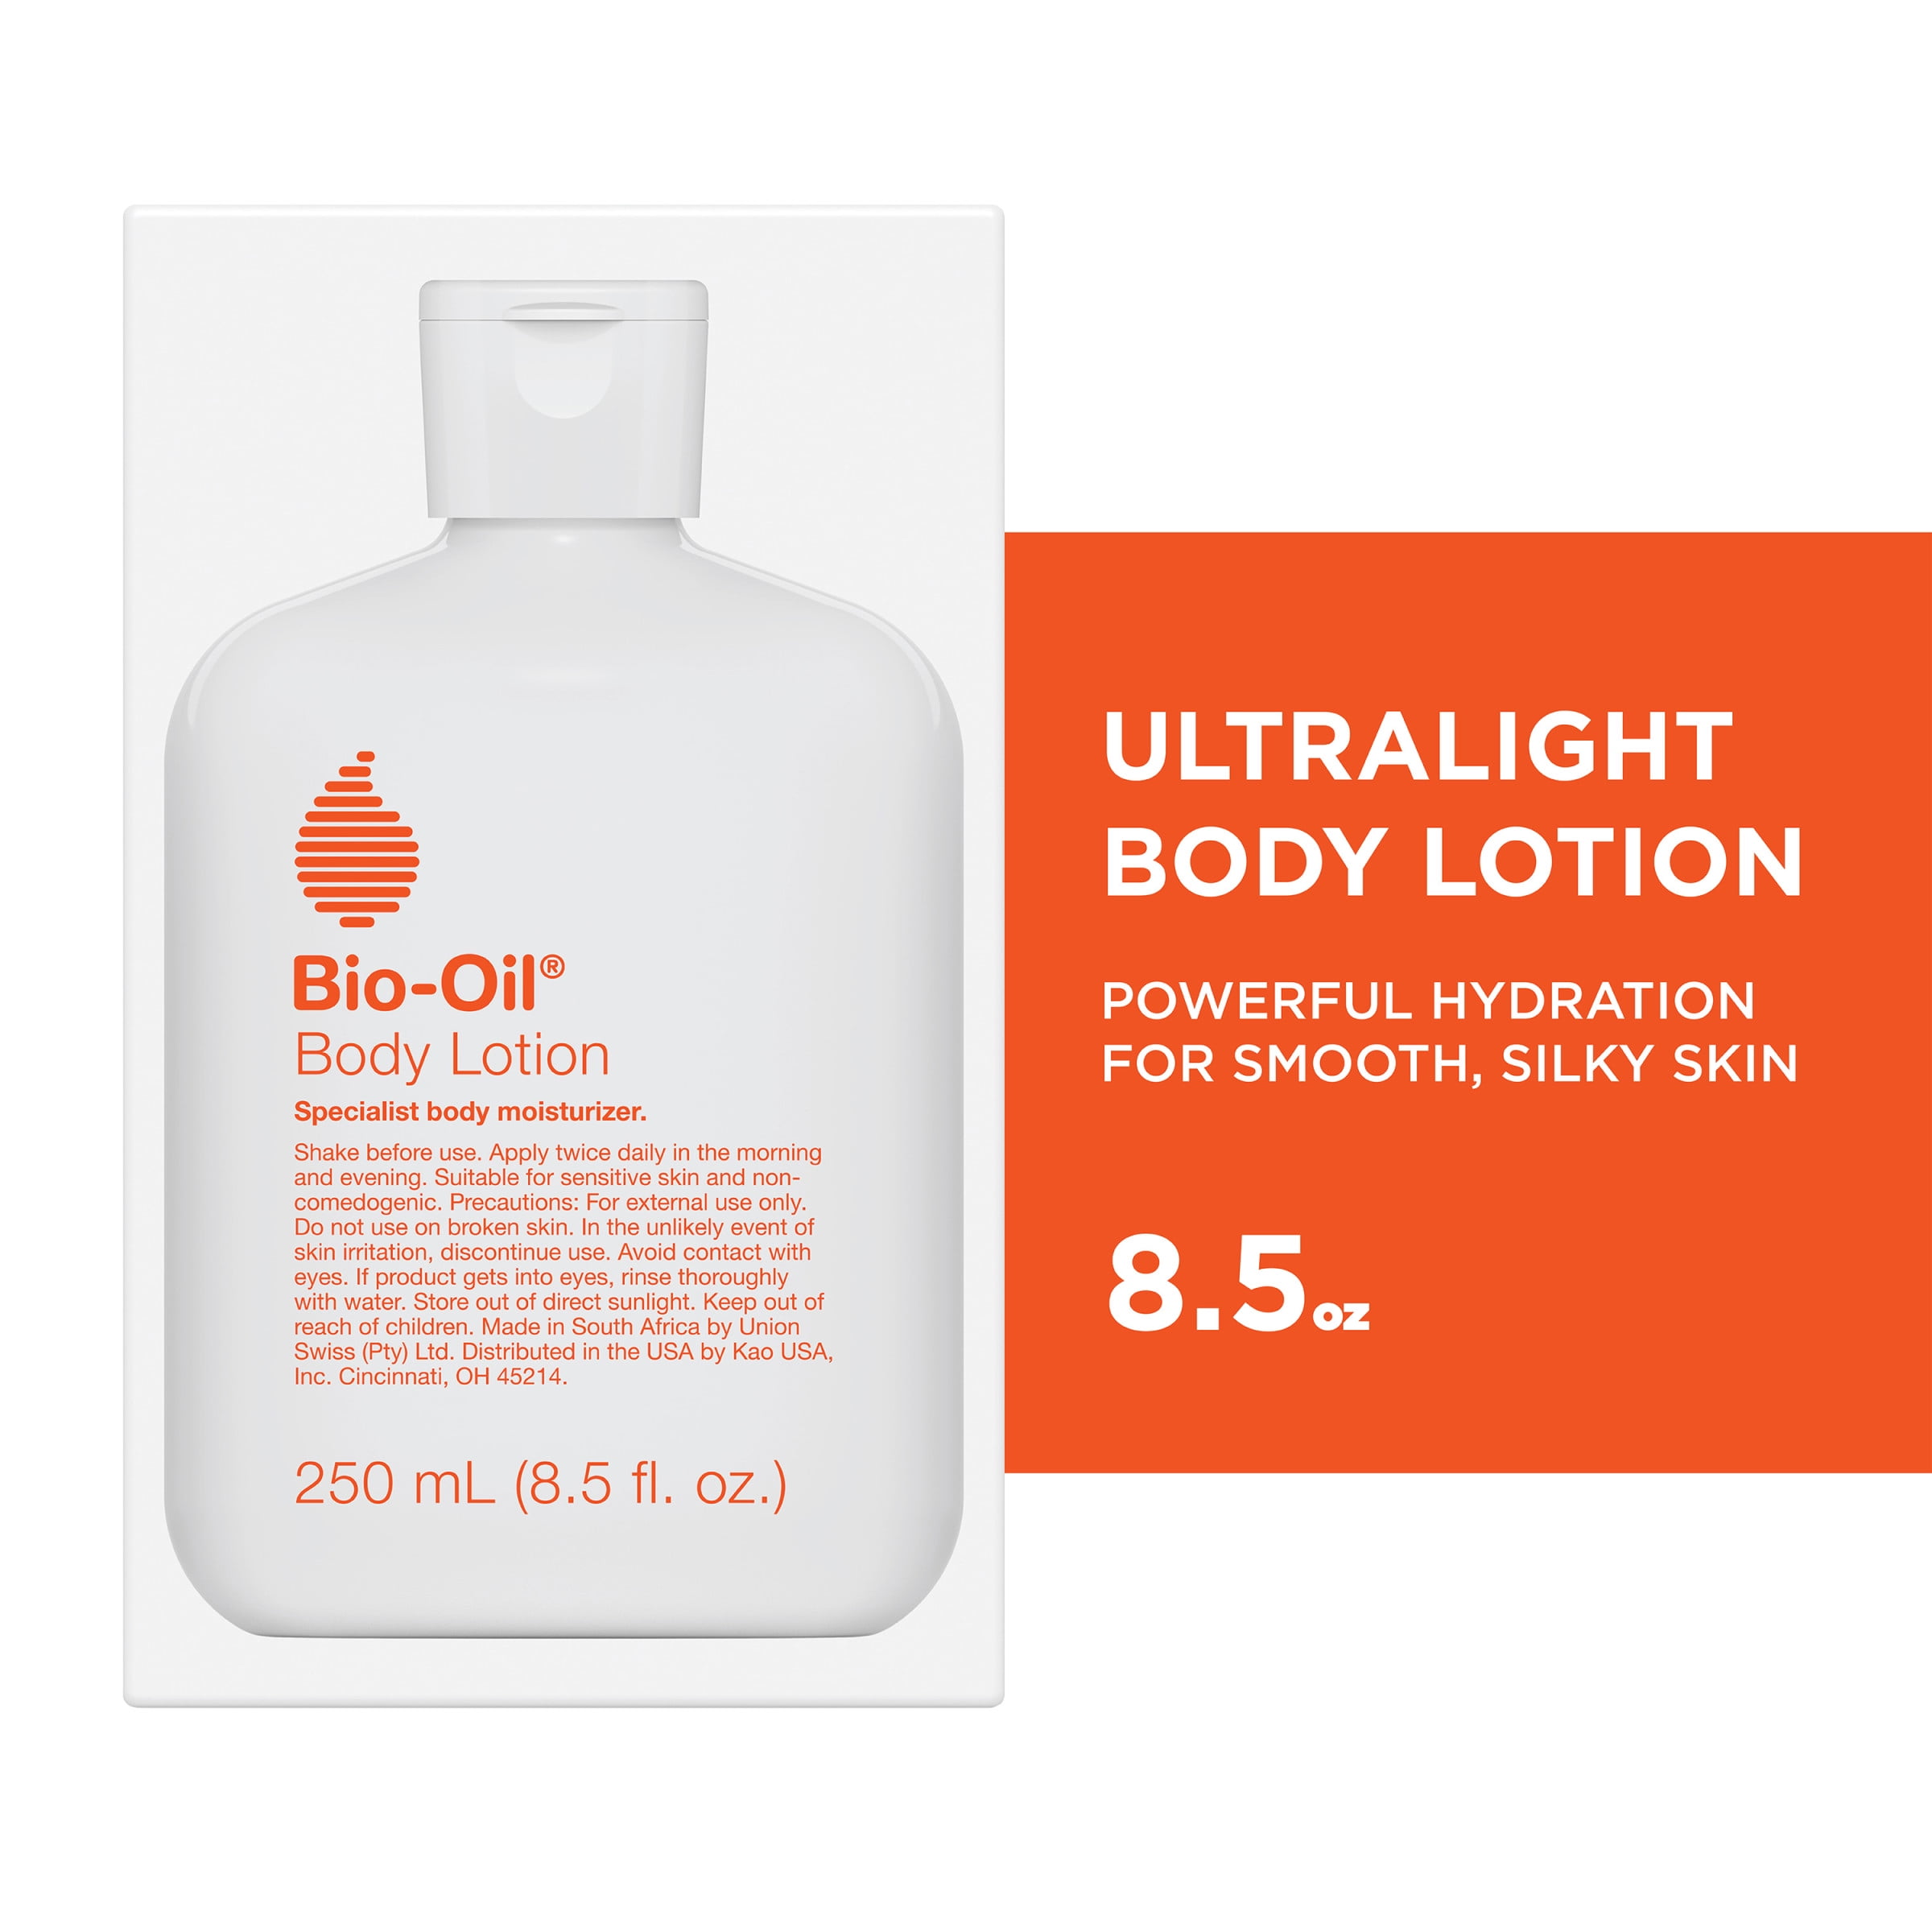 Bio-Oil Moisturizing Body Lotion for Dry Skin, Ultra-Lightweight High-Oil Hydration, with Oil, Rosehip Oil, Shea Oil, and Hyaluronic Acid, 8.5 oz - Walmart.com